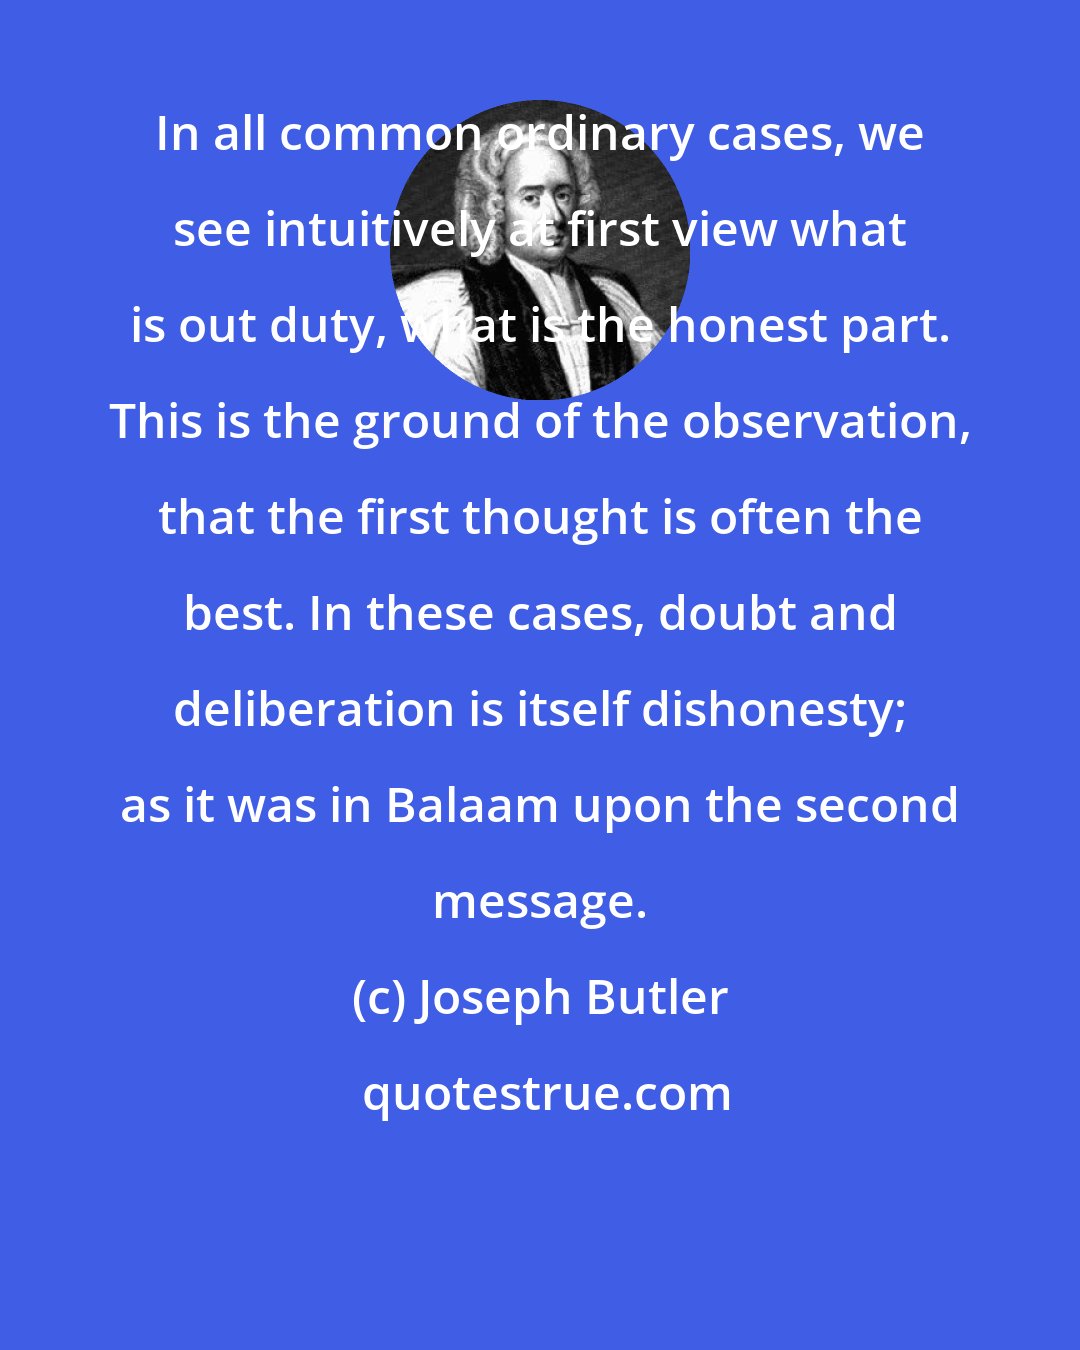 Joseph Butler: In all common ordinary cases, we see intuitively at first view what is out duty, what is the honest part. This is the ground of the observation, that the first thought is often the best. In these cases, doubt and deliberation is itself dishonesty; as it was in Balaam upon the second message.